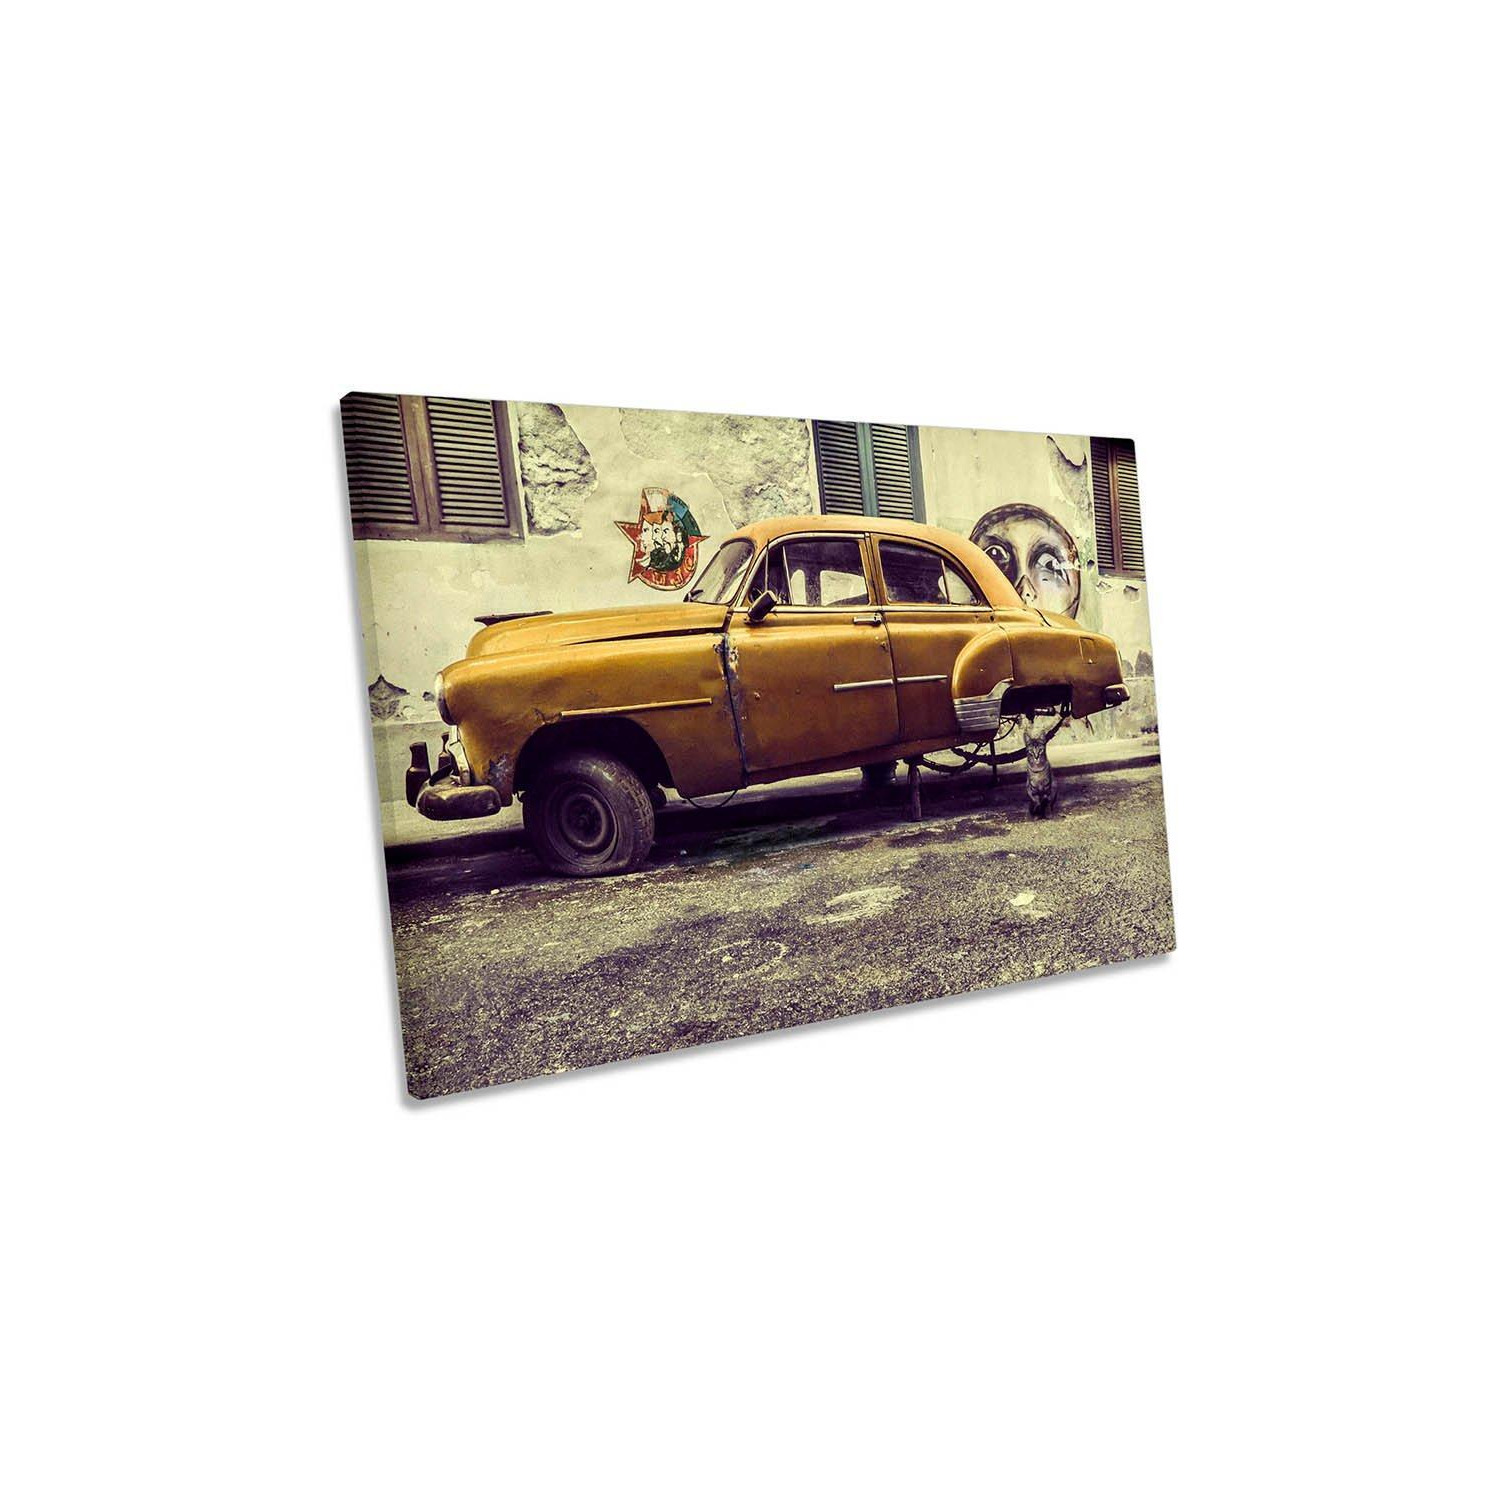 Old Car and the Cat Street Photography Canvas Wall Art Picture Print - image 1